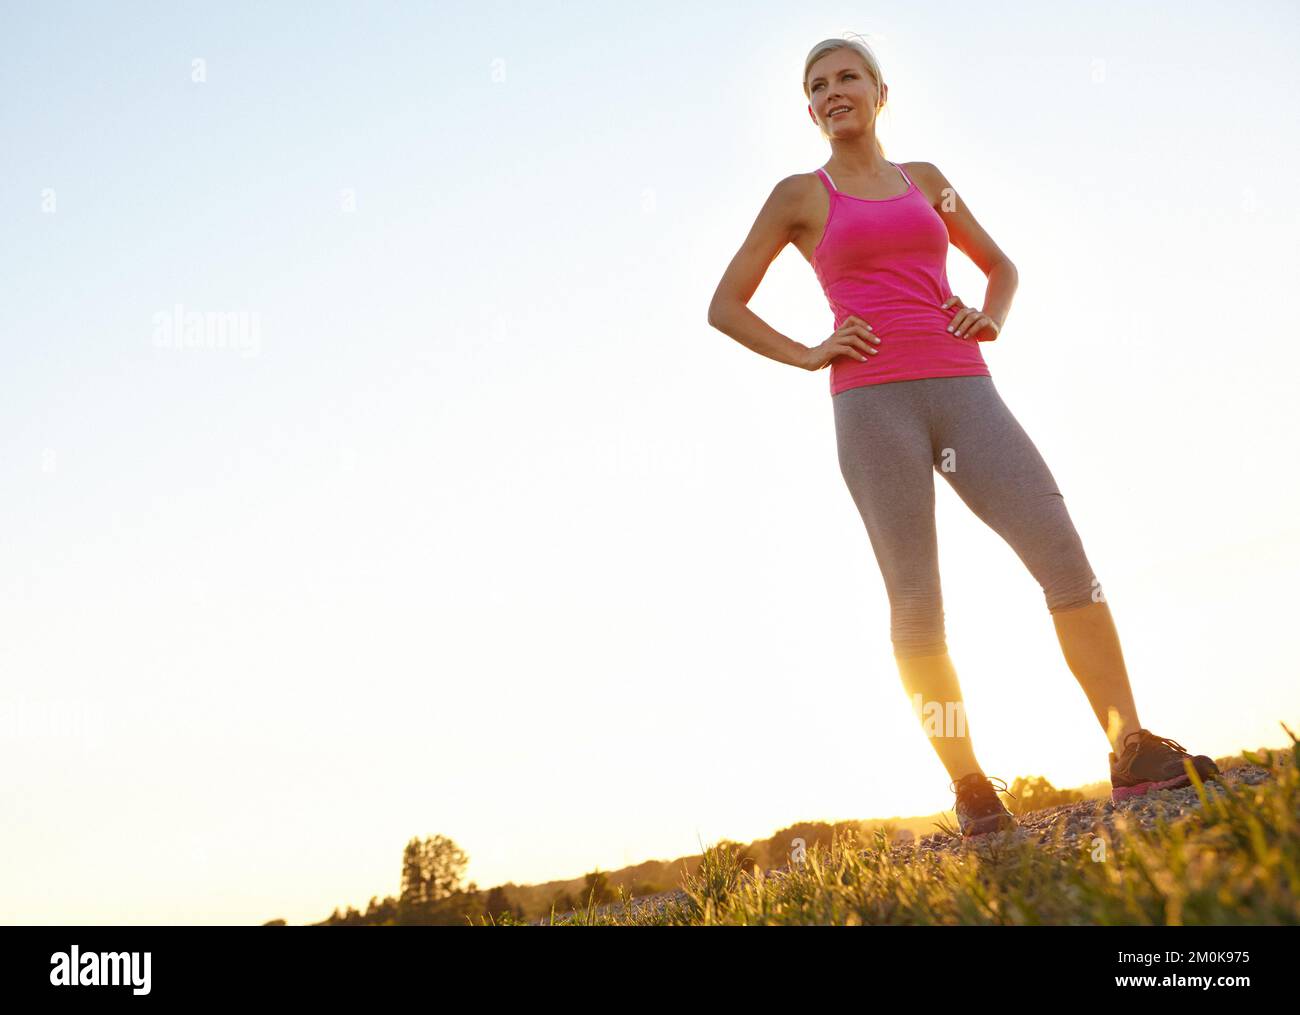 Building confidence with fitness. A young woman standing with arms akimbo in a field wearing sportswear. Stock Photo